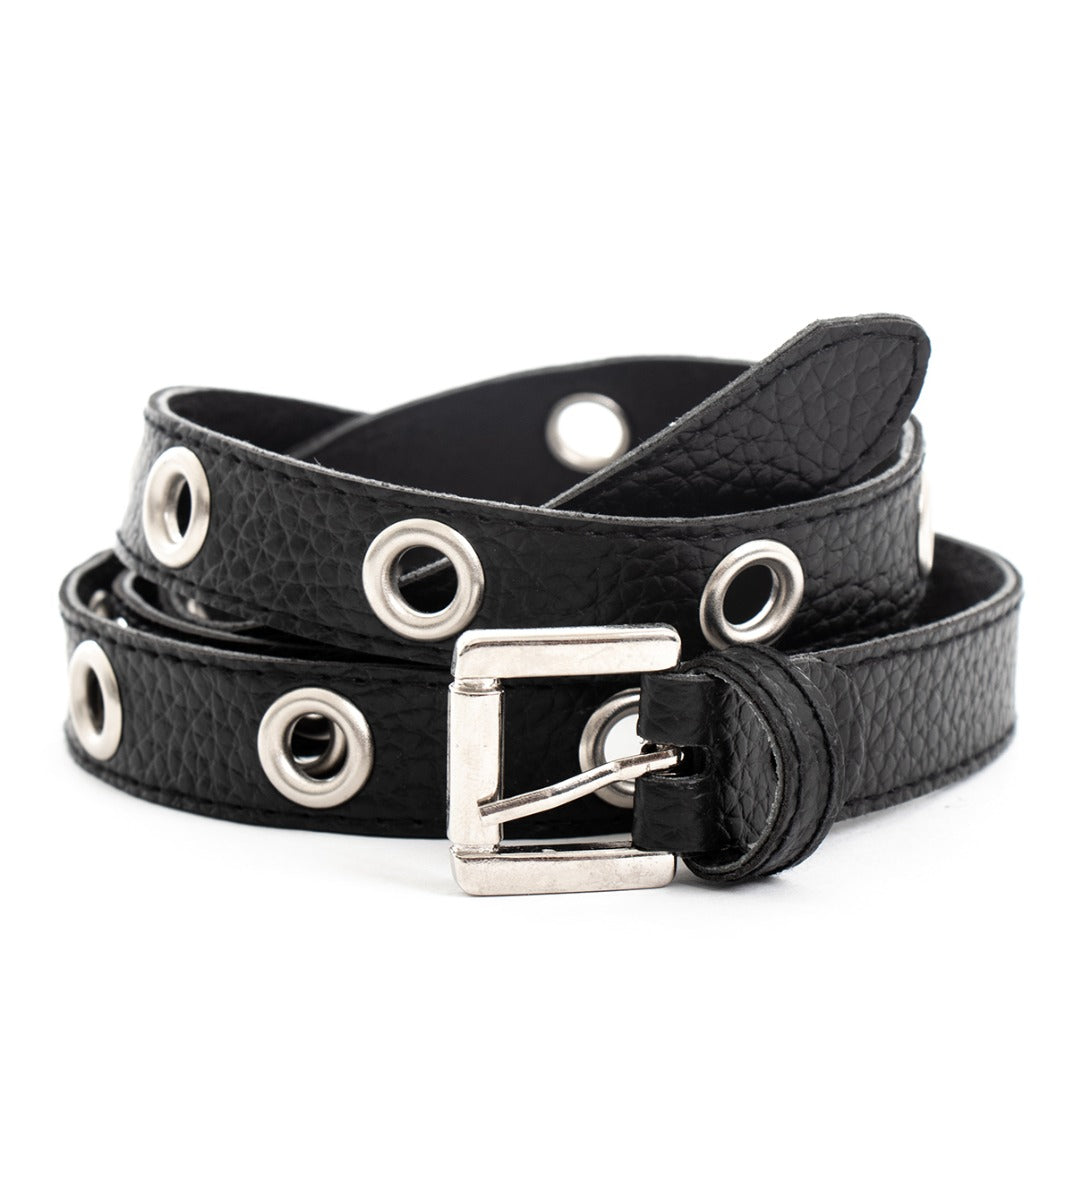 Men's Belt with Adjustable Metal Buckle in Black Faux Leather GIOSAL-A2052A